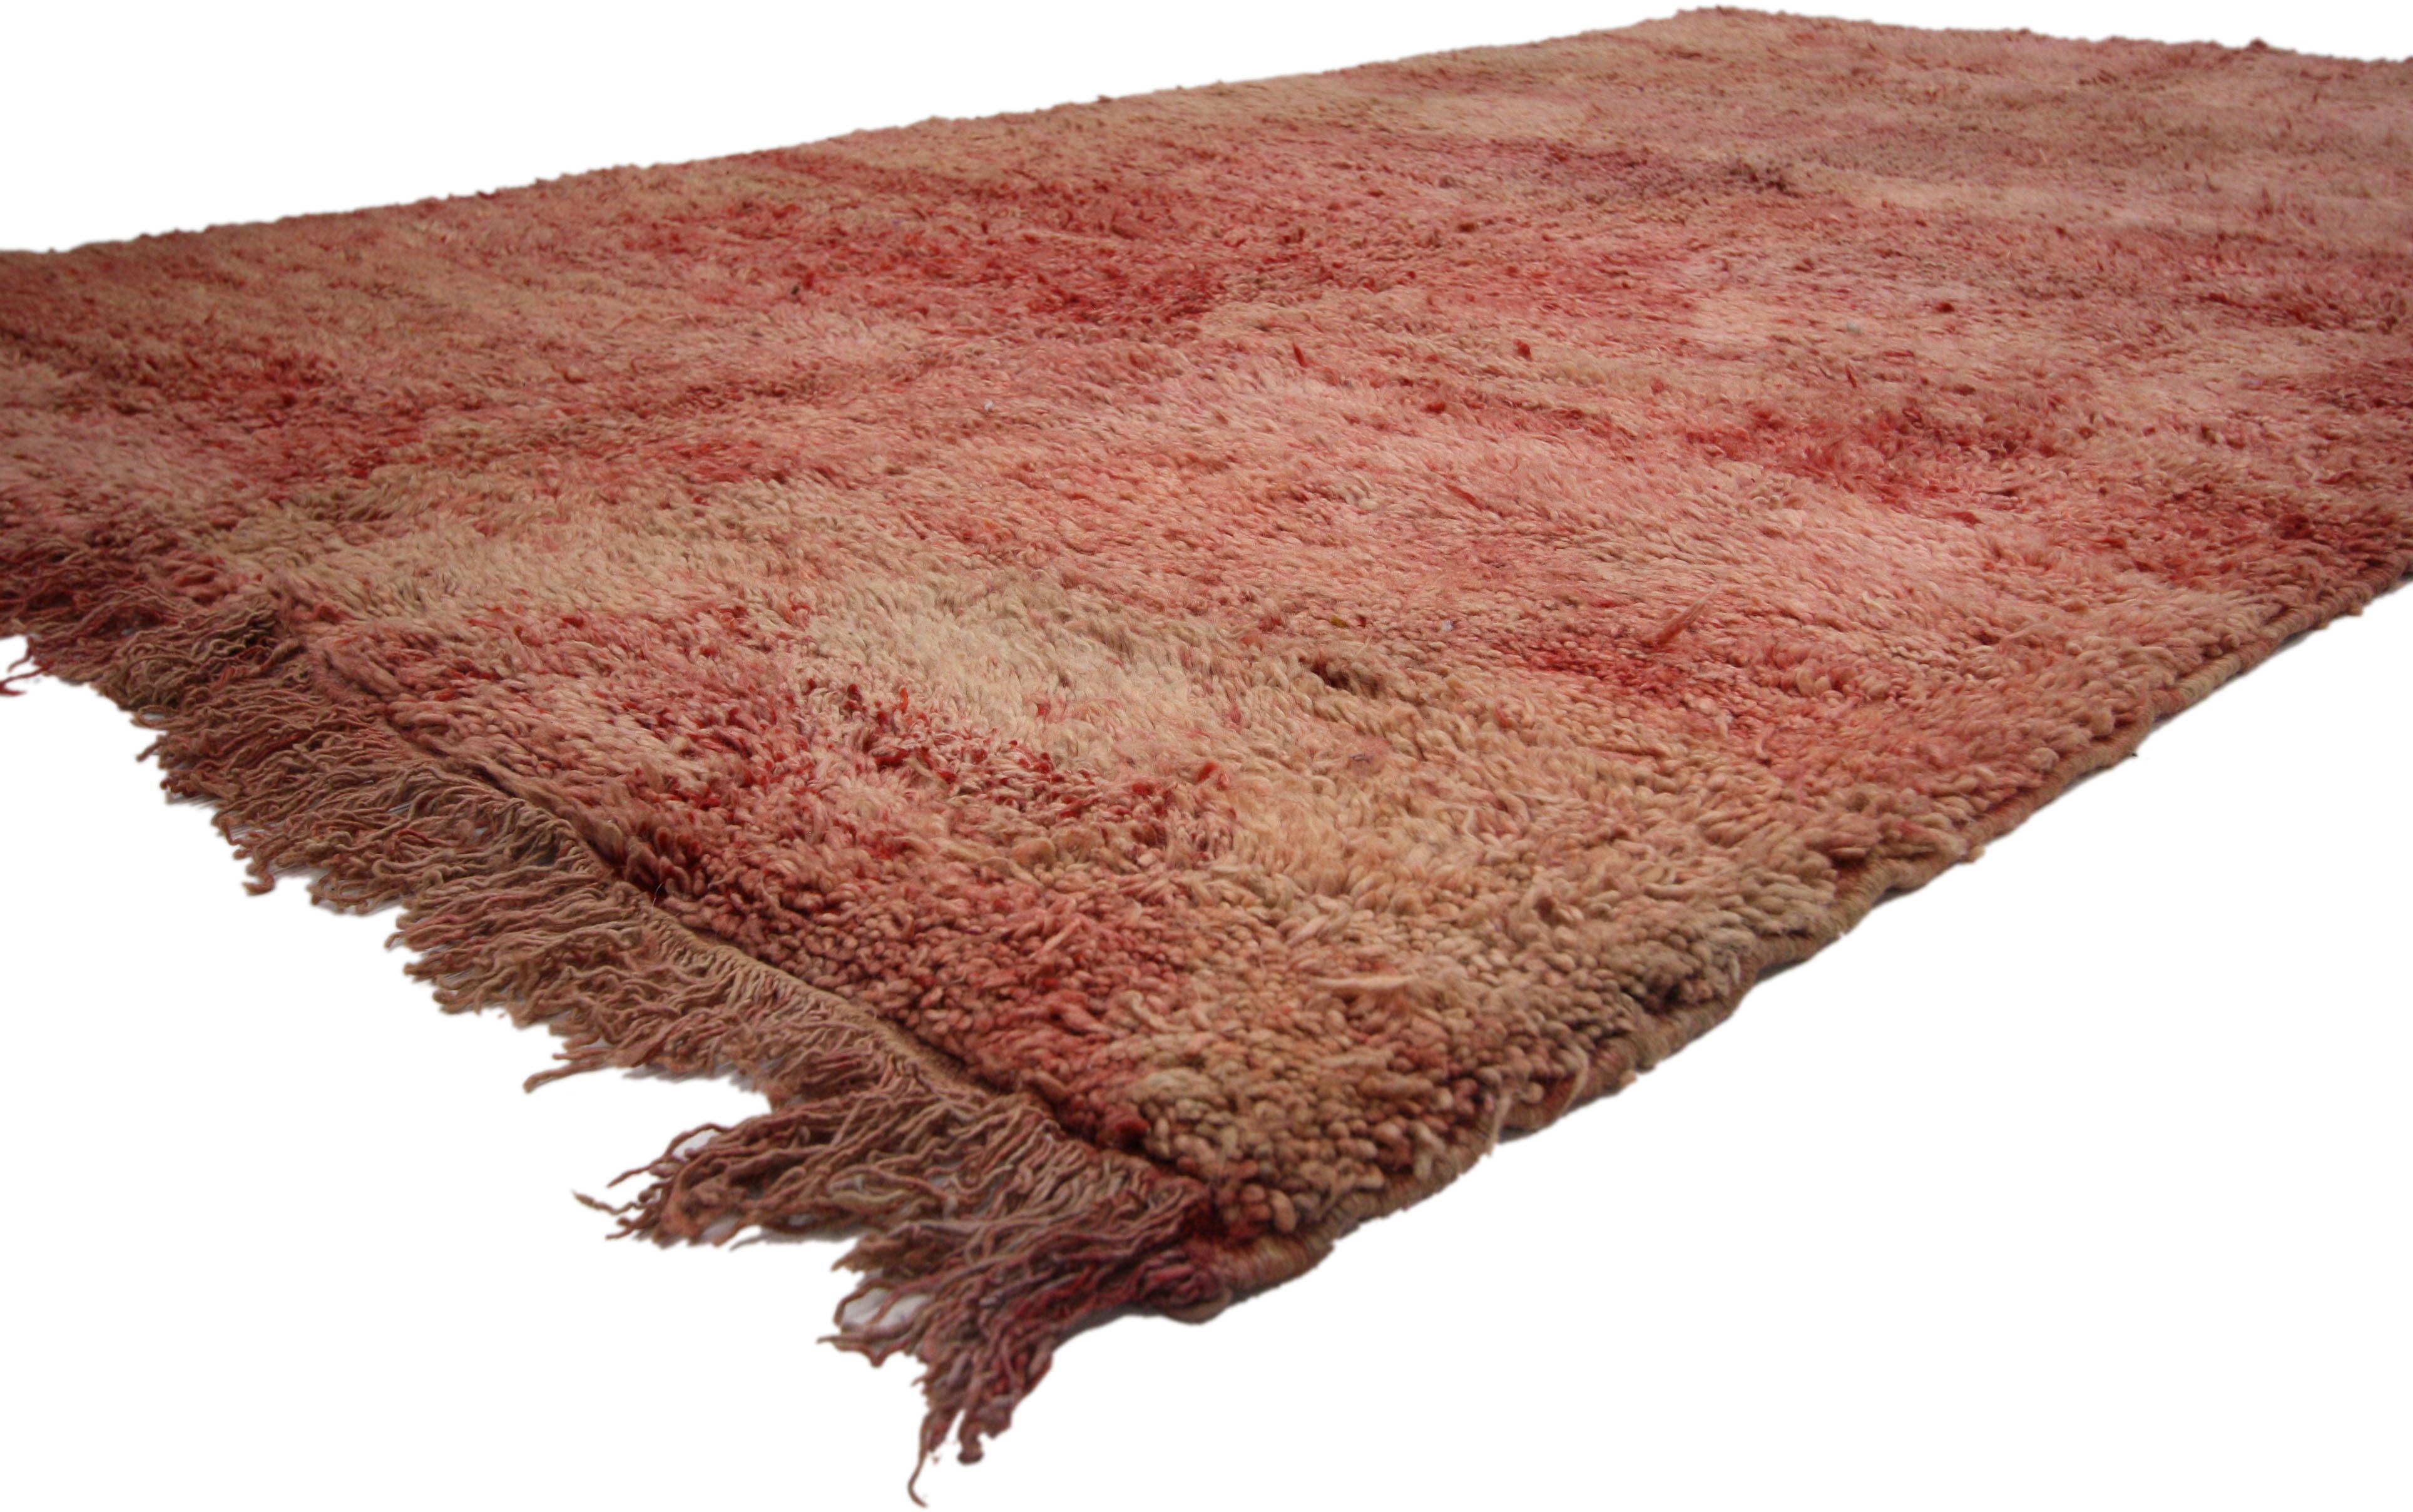 20649, vintage Berber Moroccan rug with rustic warm, Mid-Century Modern style. Drawing inspiration from nature with its warm rustic colors and rugged beauty, this hand knotted wool vintage Berber Moroccan rug embodies a rustic Mid-Century Modern